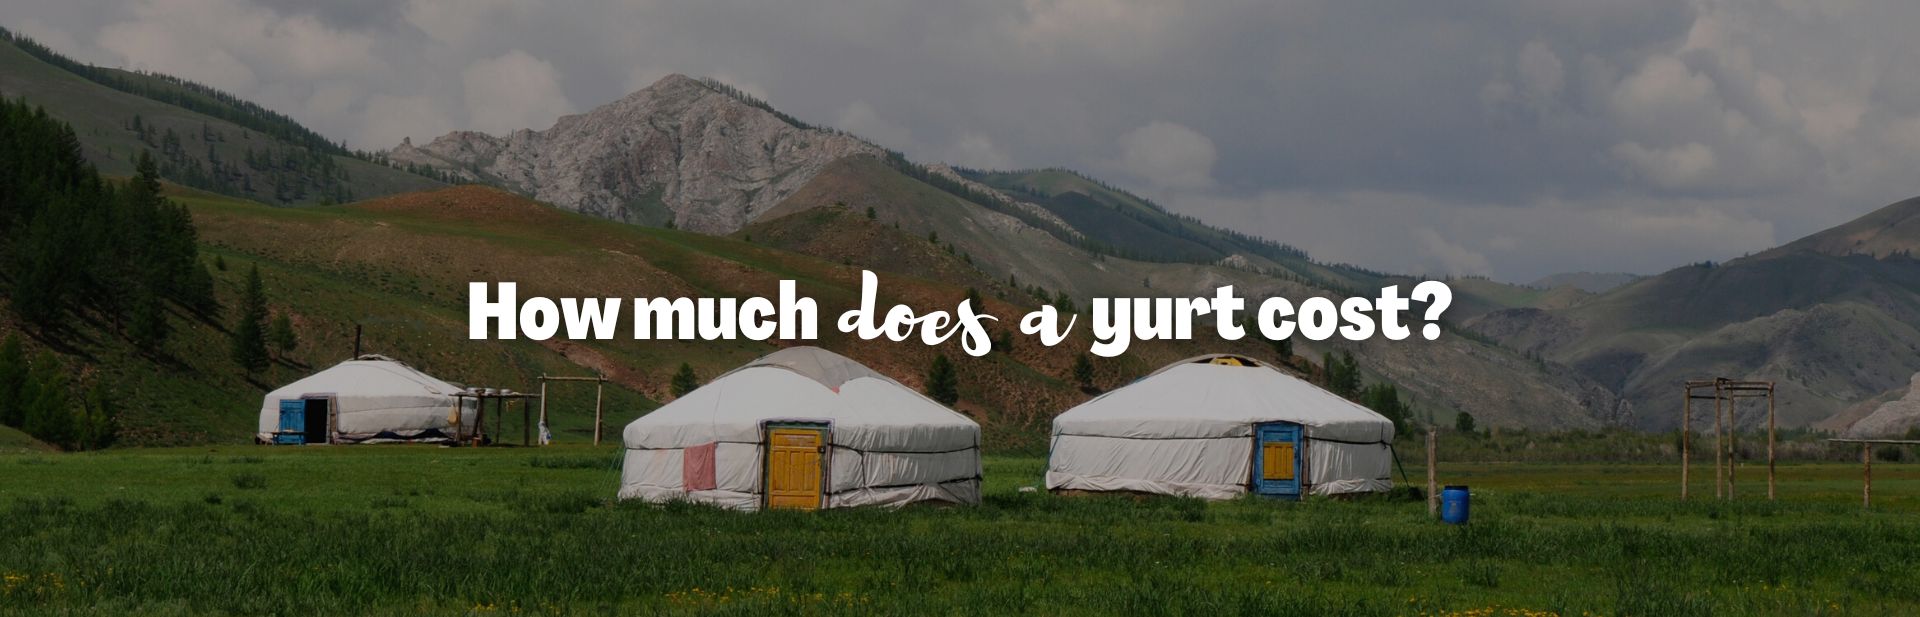 How Much Does a Yurt Cost? The Price of Buying and Living in a Yurt